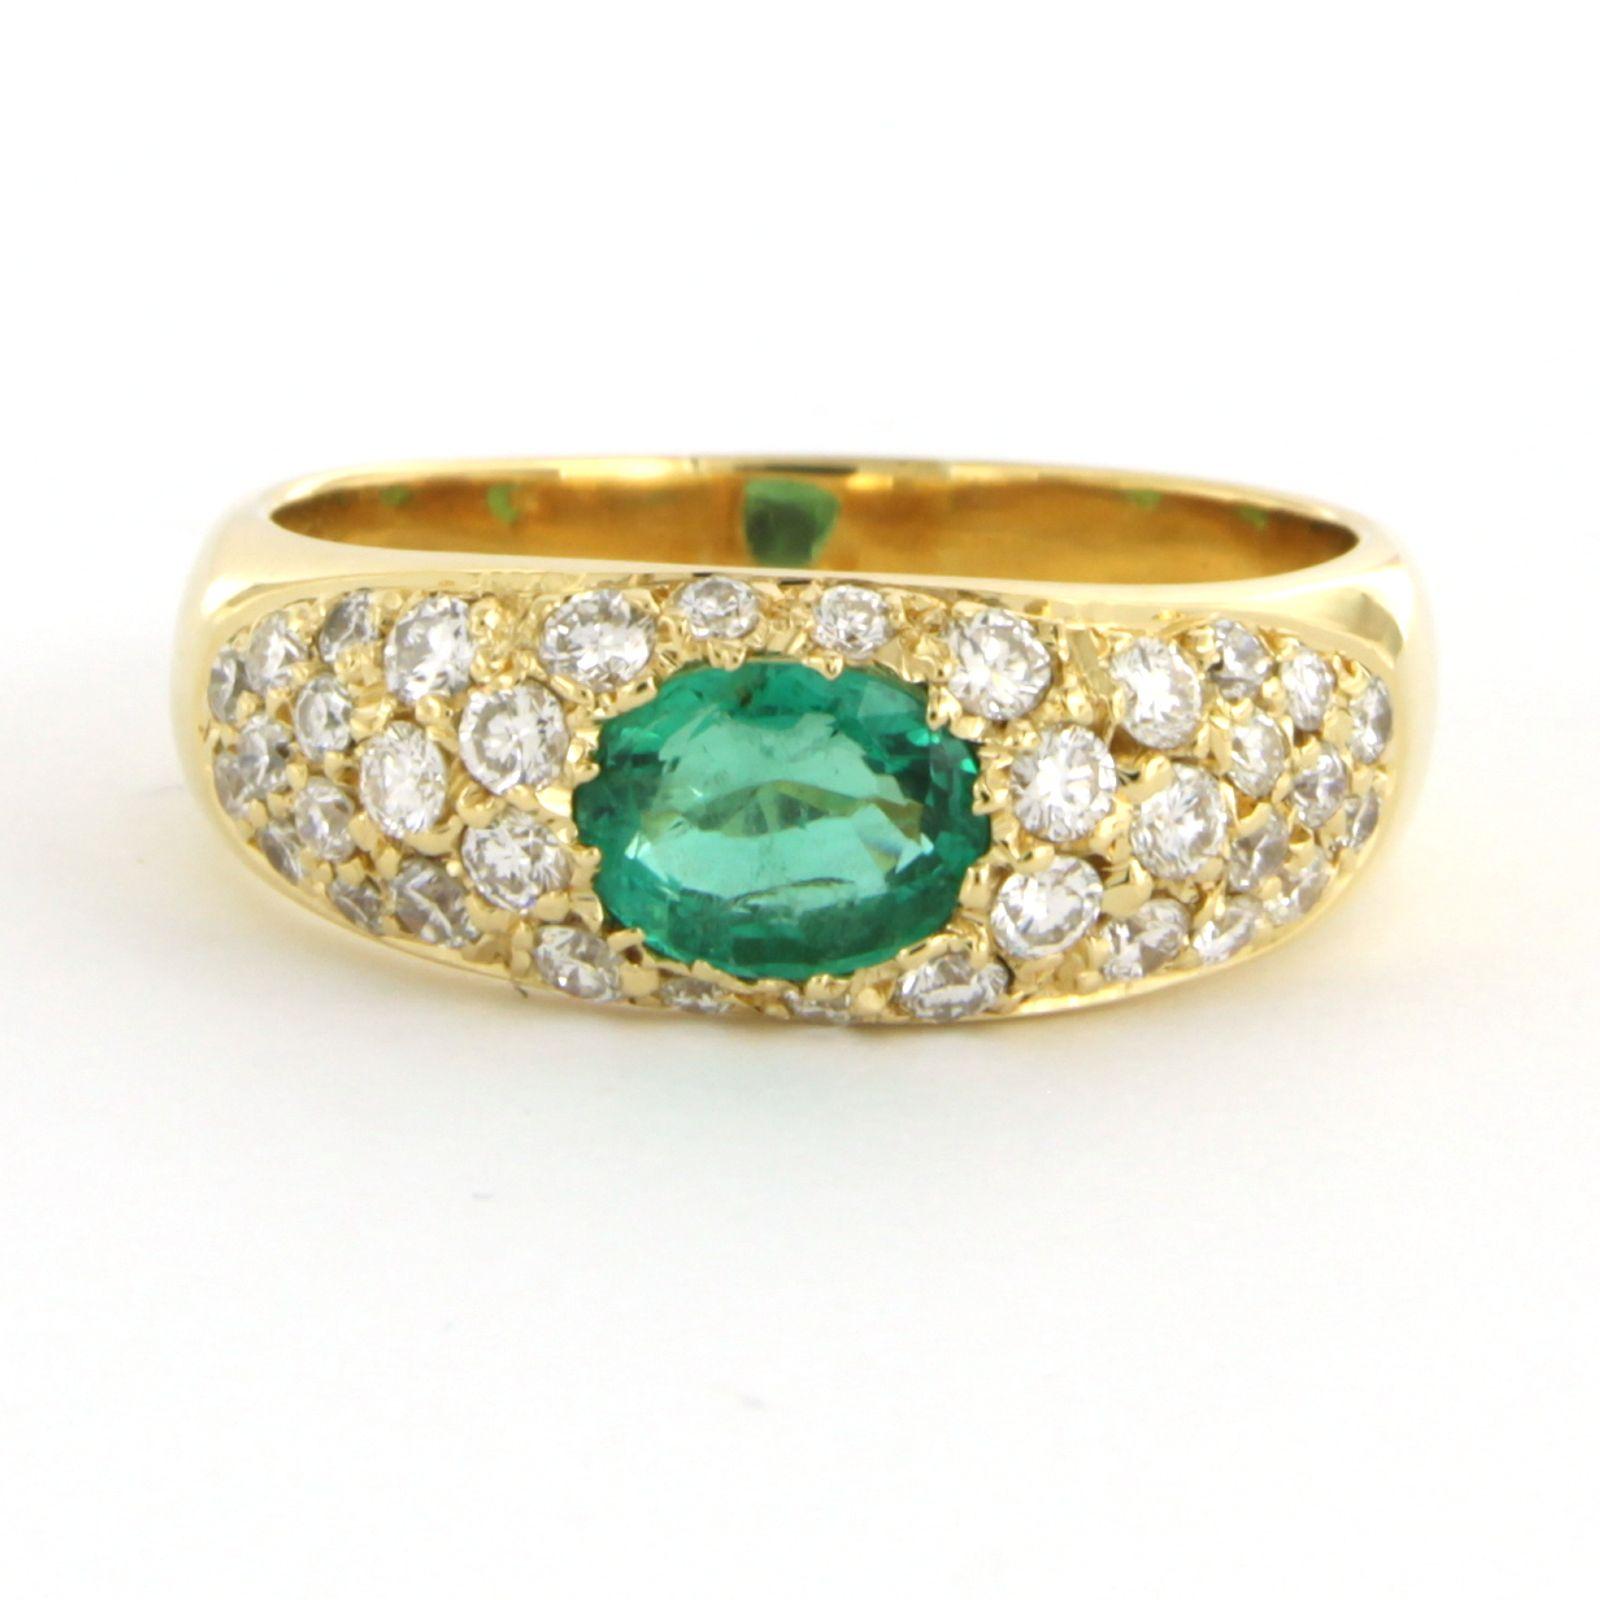 14k yellow gold ring set with emerald and brilliant cut diamonds. 0.75ct -F/G - VS/SI - ring size U.S. 8.75 – EU. 18.75(59)

detailed description:

The top of the ring is 7.7 mm wide

Ring size US 8.75 – EU. 18.75(59), rings can be enlarged or